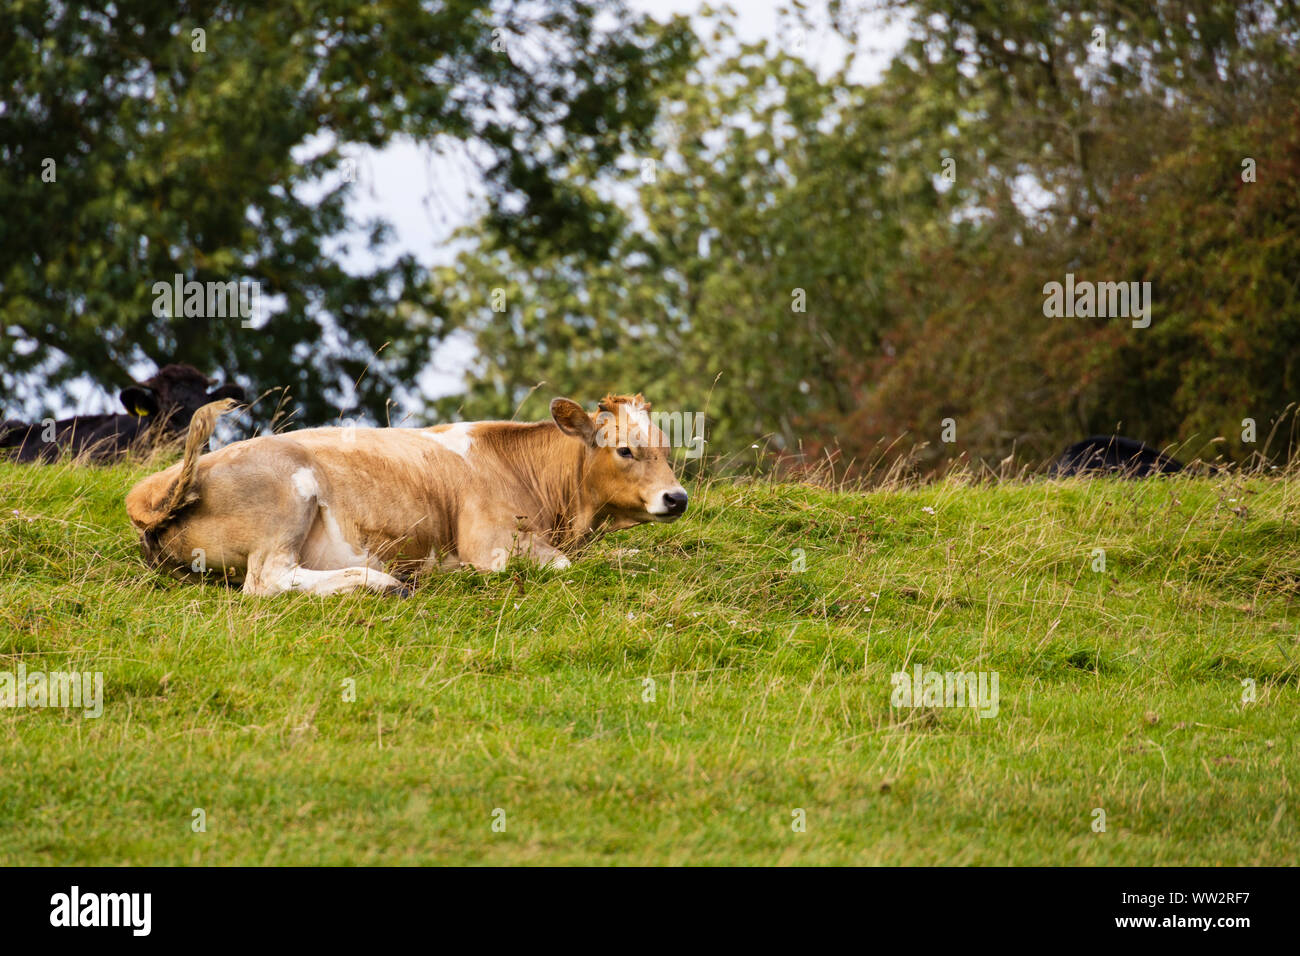 Cow lying down on the grass on the banks of the River Trent, Gunthorpe, Nottinghamshire. Stock Photo